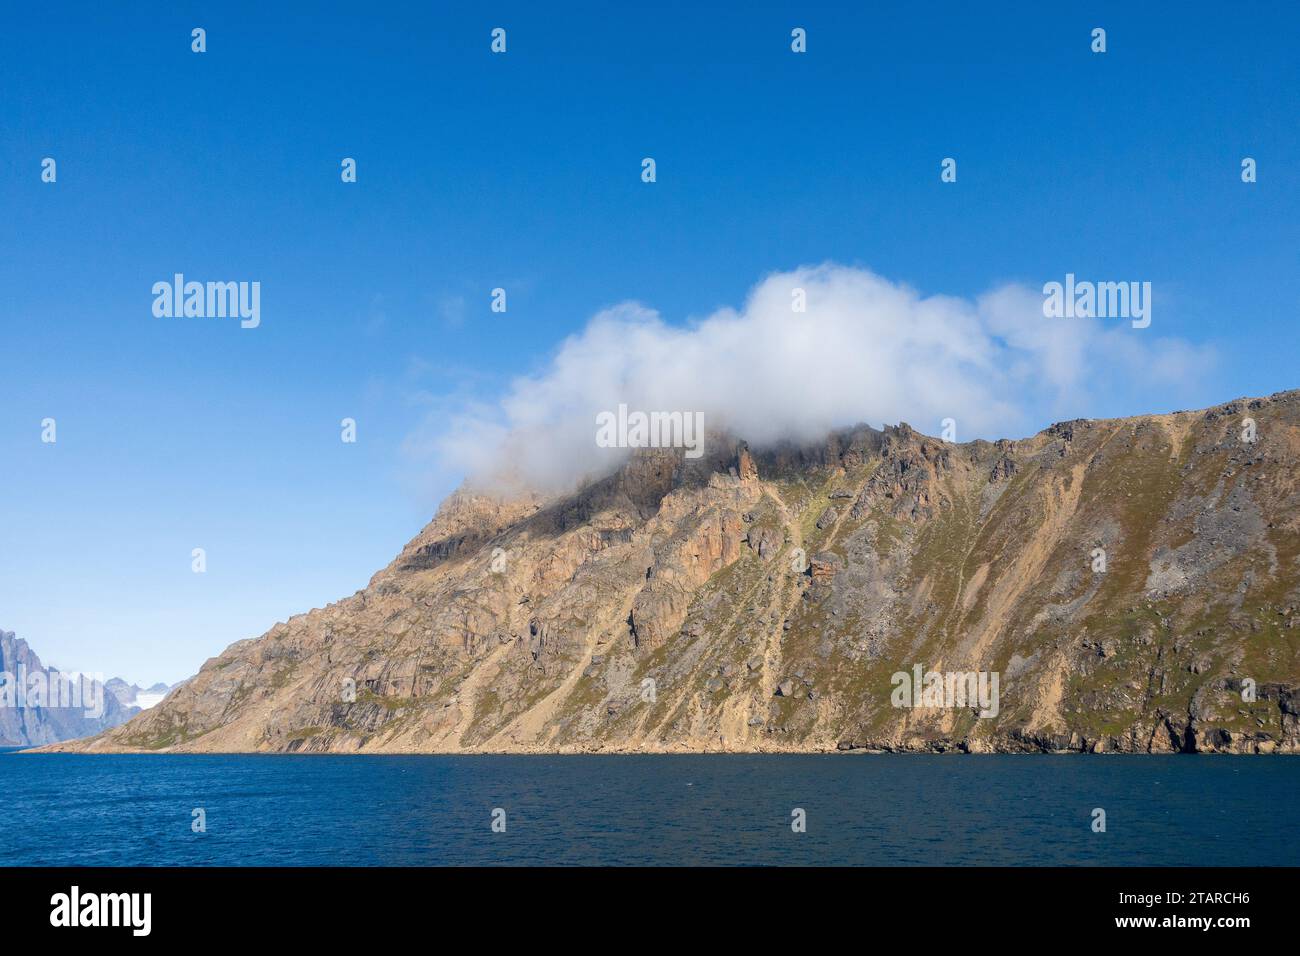 Low Cloud On A Mountain In Prince Christian Sound Fjord Greenland, In Southern Greenland Seascape, Ocean, Cliff Mountainside, Isolated Cloud Stock Photo